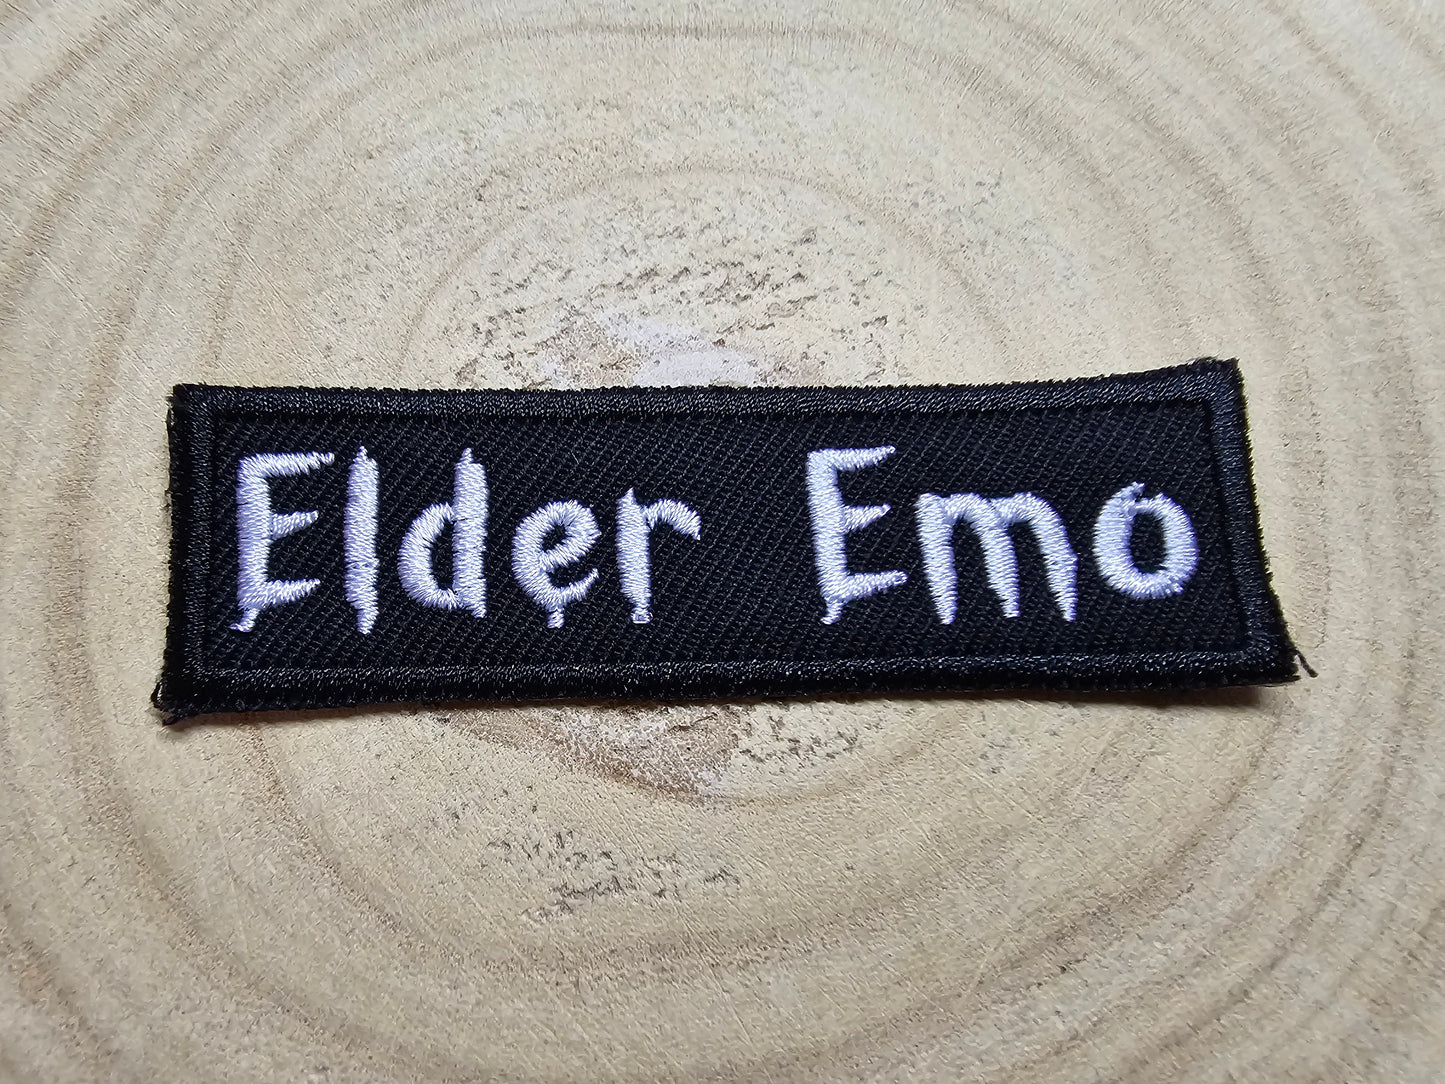 Elder Emo Kid Embroidered Patch Pop Punk Metalcore 00s Culture Throwback